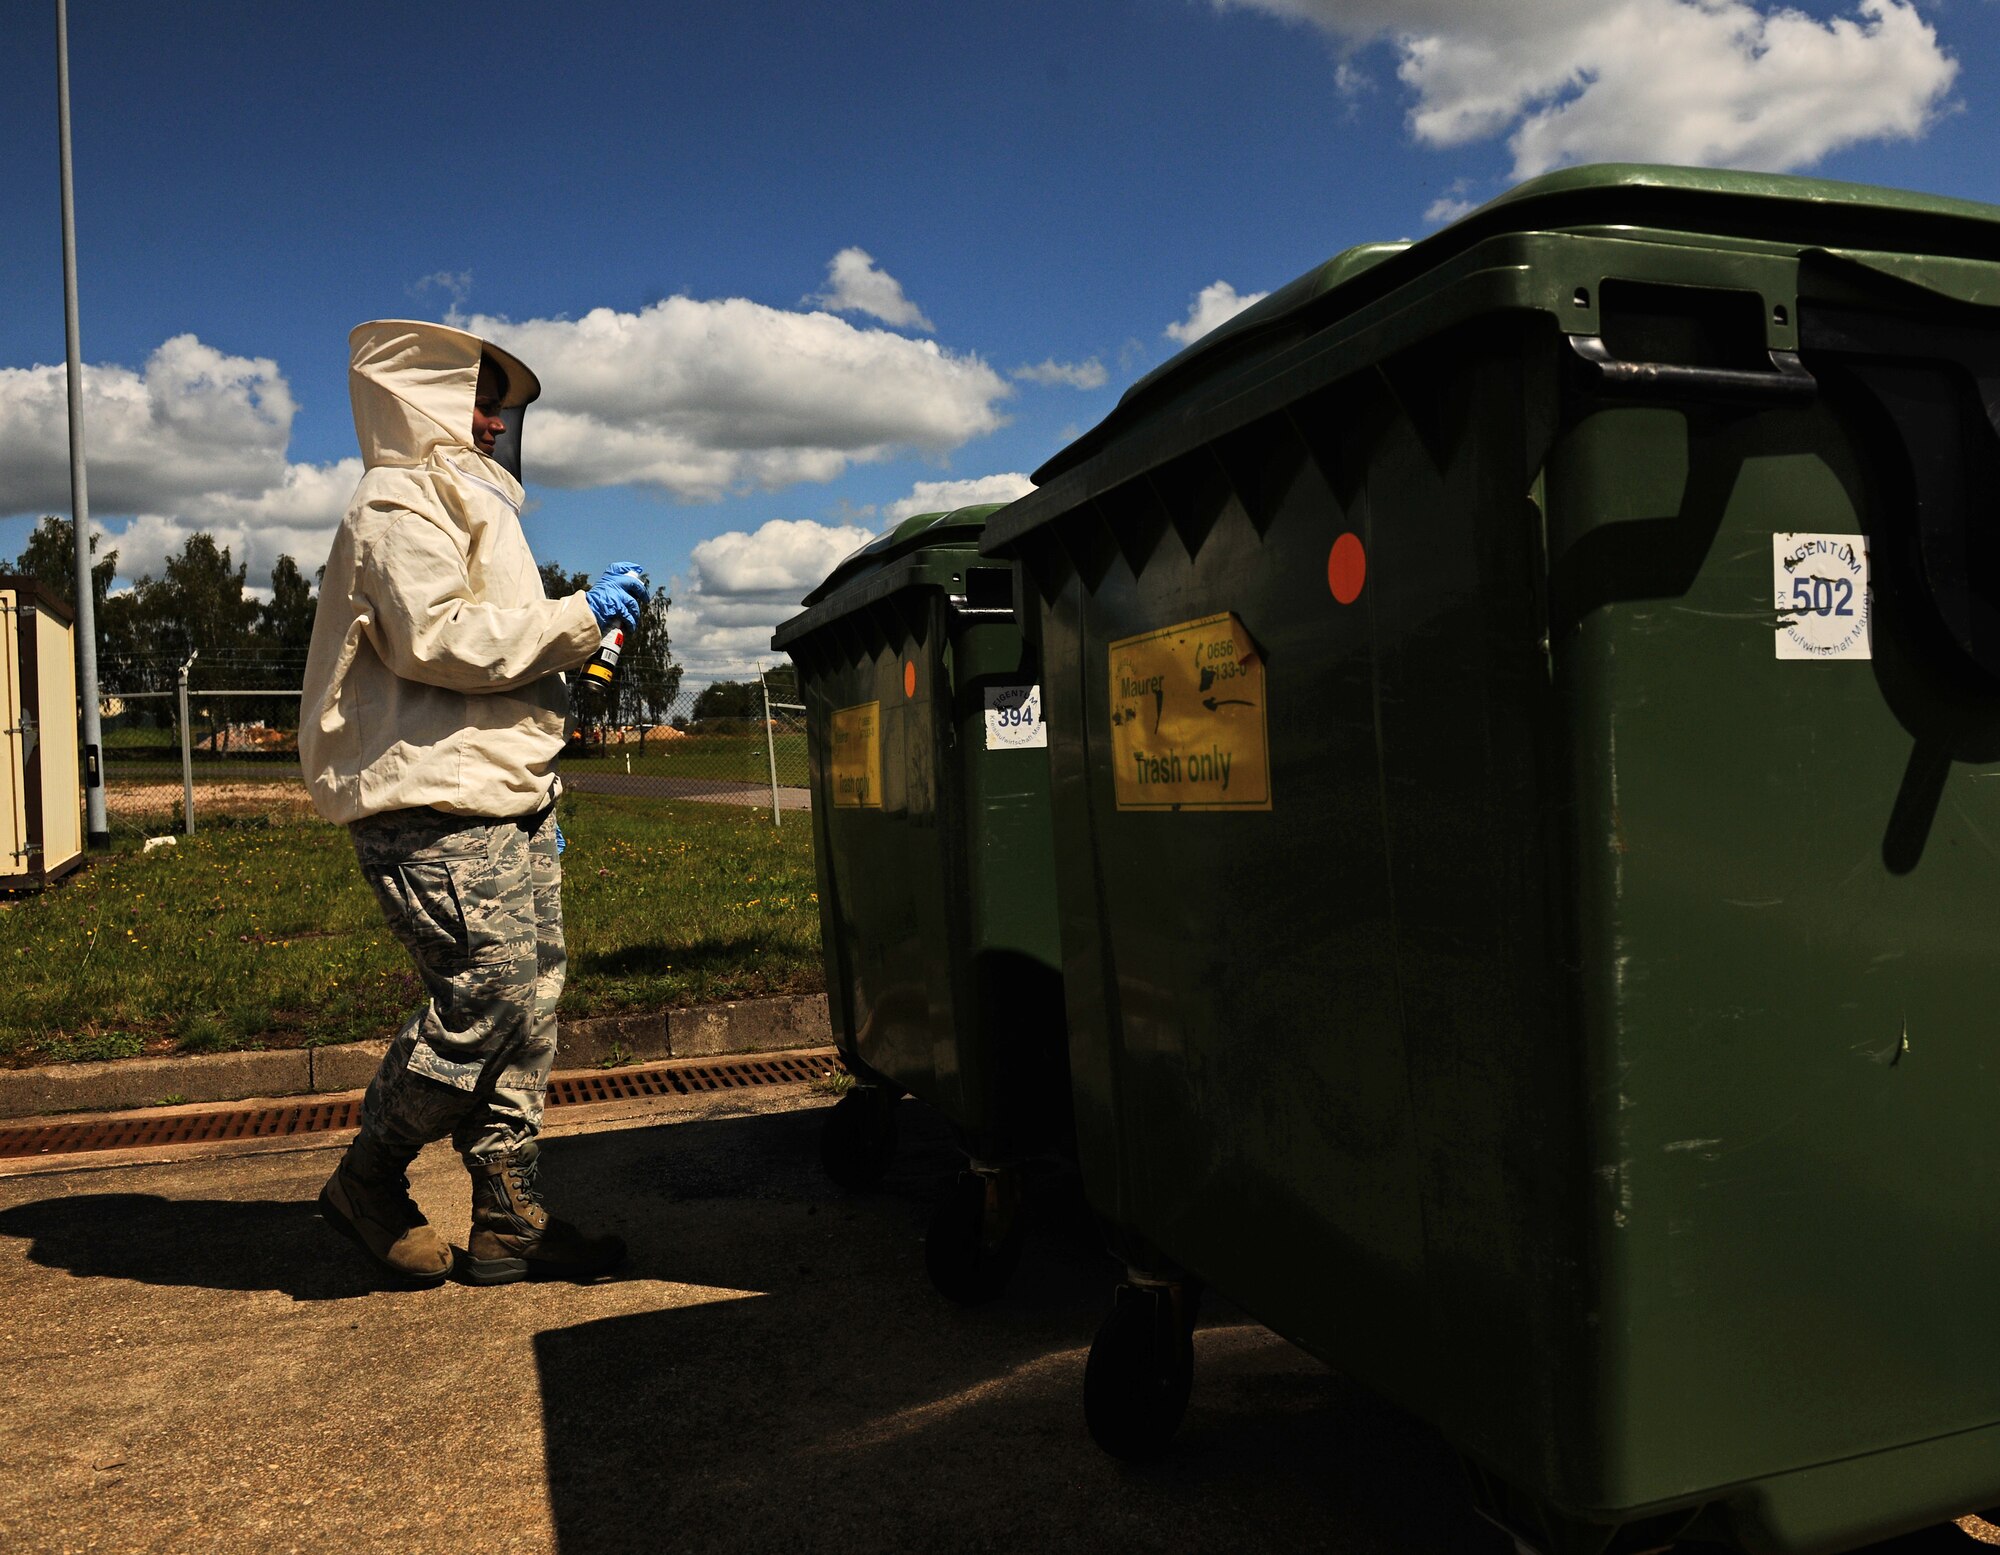 SPANGDAHLEM AIR BASE, Germany -- Airman 1st Class Elizabeth McCasland, 52nd Civil Engineer Squadron pest controller, checks a trash bin for a wasp nest here Aug. 15. The 52nd Civil Engineer Squadron Pest Management Flight specializes in ridding the base of insects, rodents and animals that may pose harm to base members and daily mission operations. (U.S. Air Force photo/Staff Sgt. Nathanael Callon)